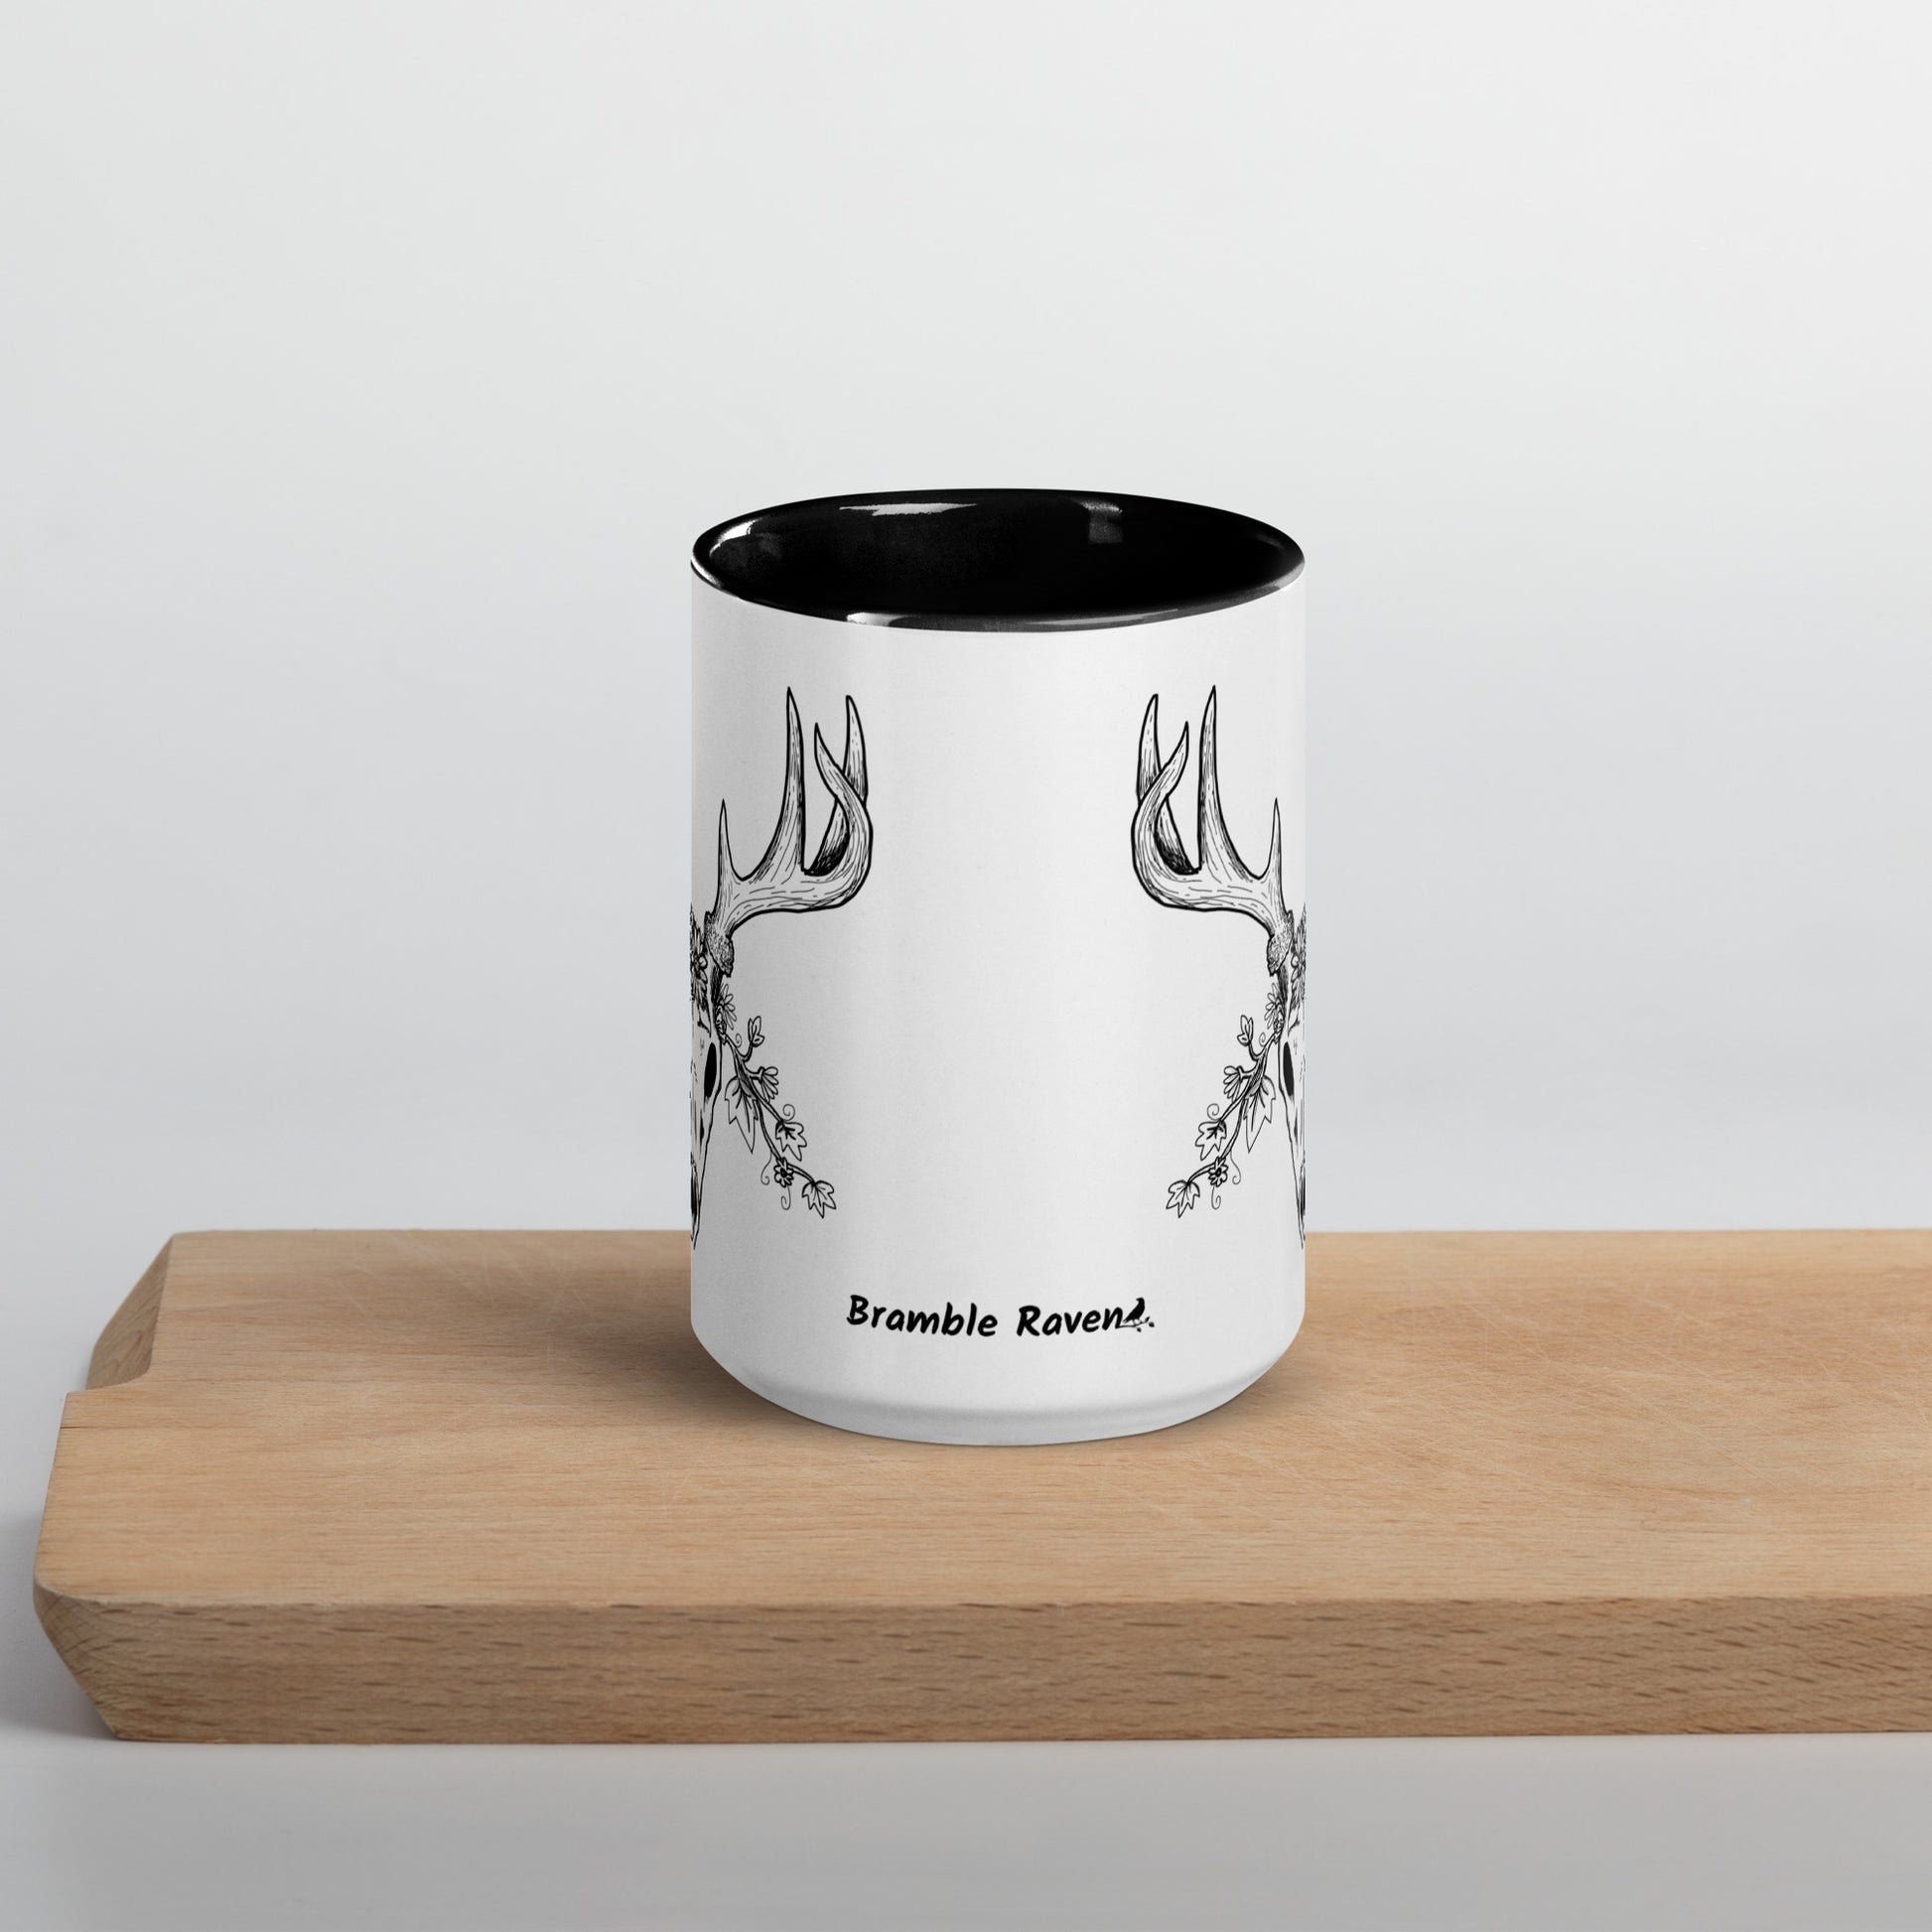 15 ounce ceramic mug with hand illustrated deer skull wreathed in flowers. Double-sided design. Mug has black rim, handle, and inside. Front view of mug shown sitting on wooden cutting board.